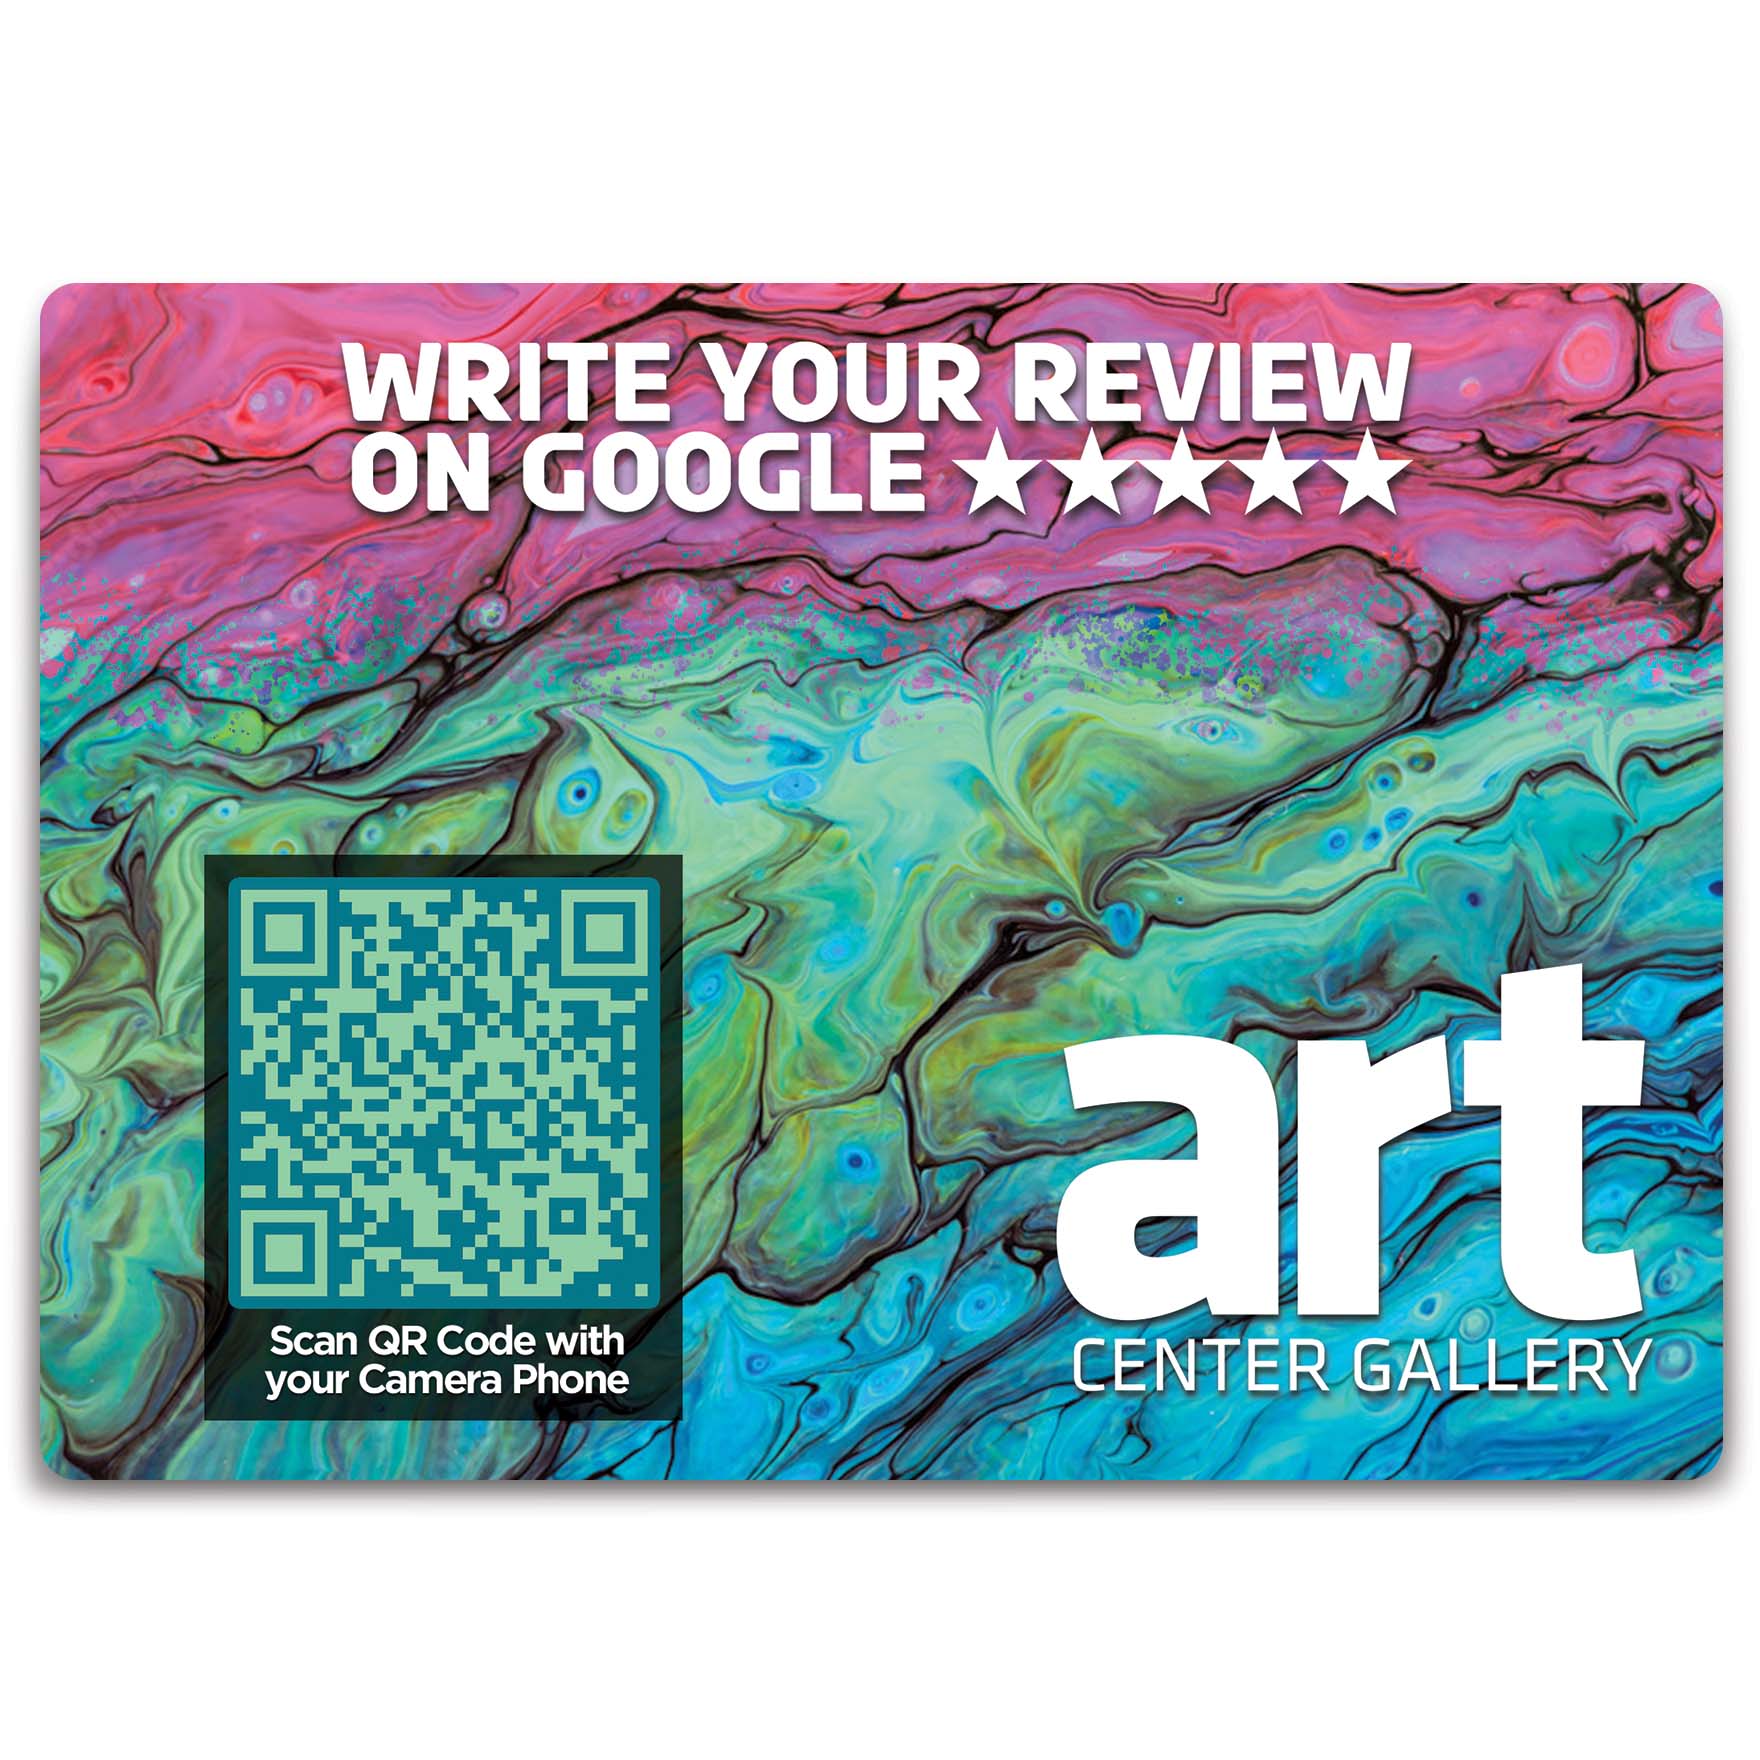 Marketing for Art Gallery to Get Google Reviews